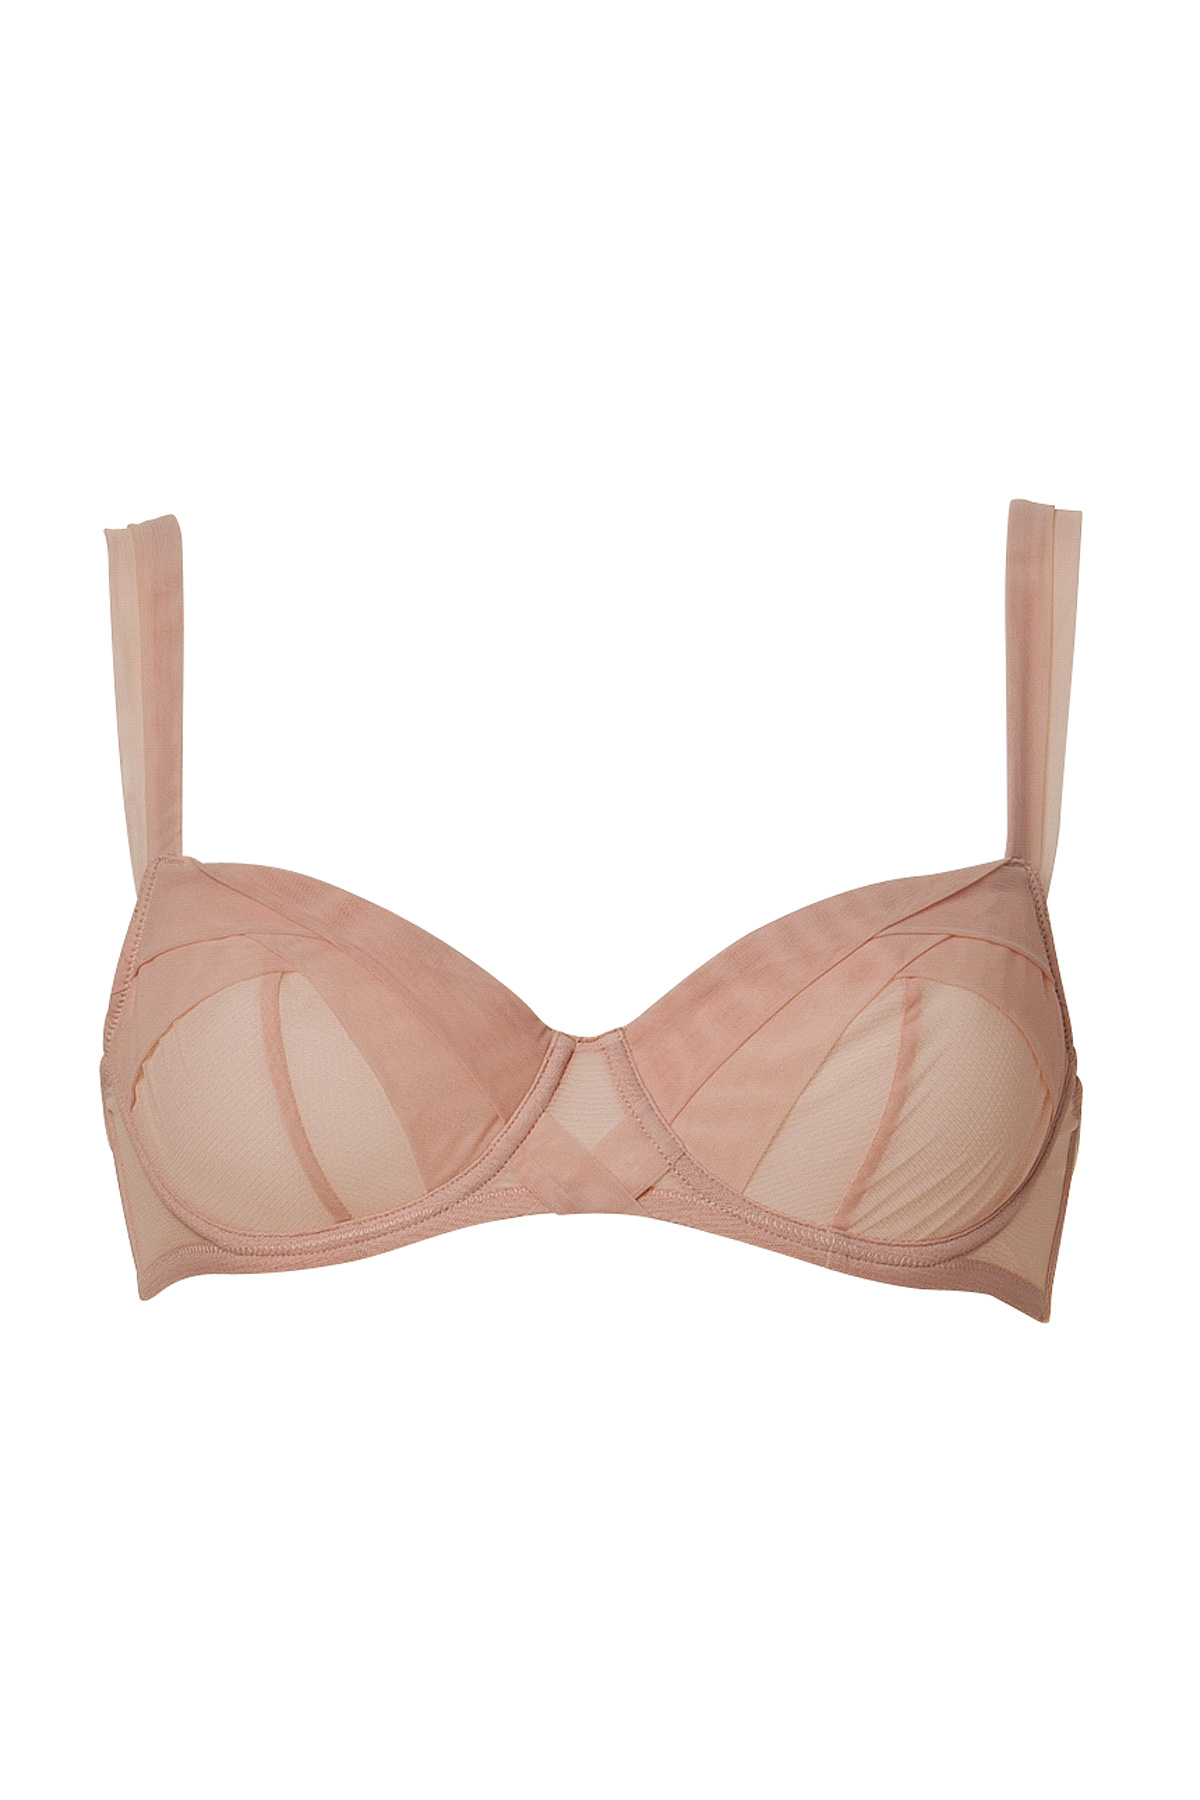 Lyst - Chantal thomass Baby Pink Draped Encens Moi Bra in Pink